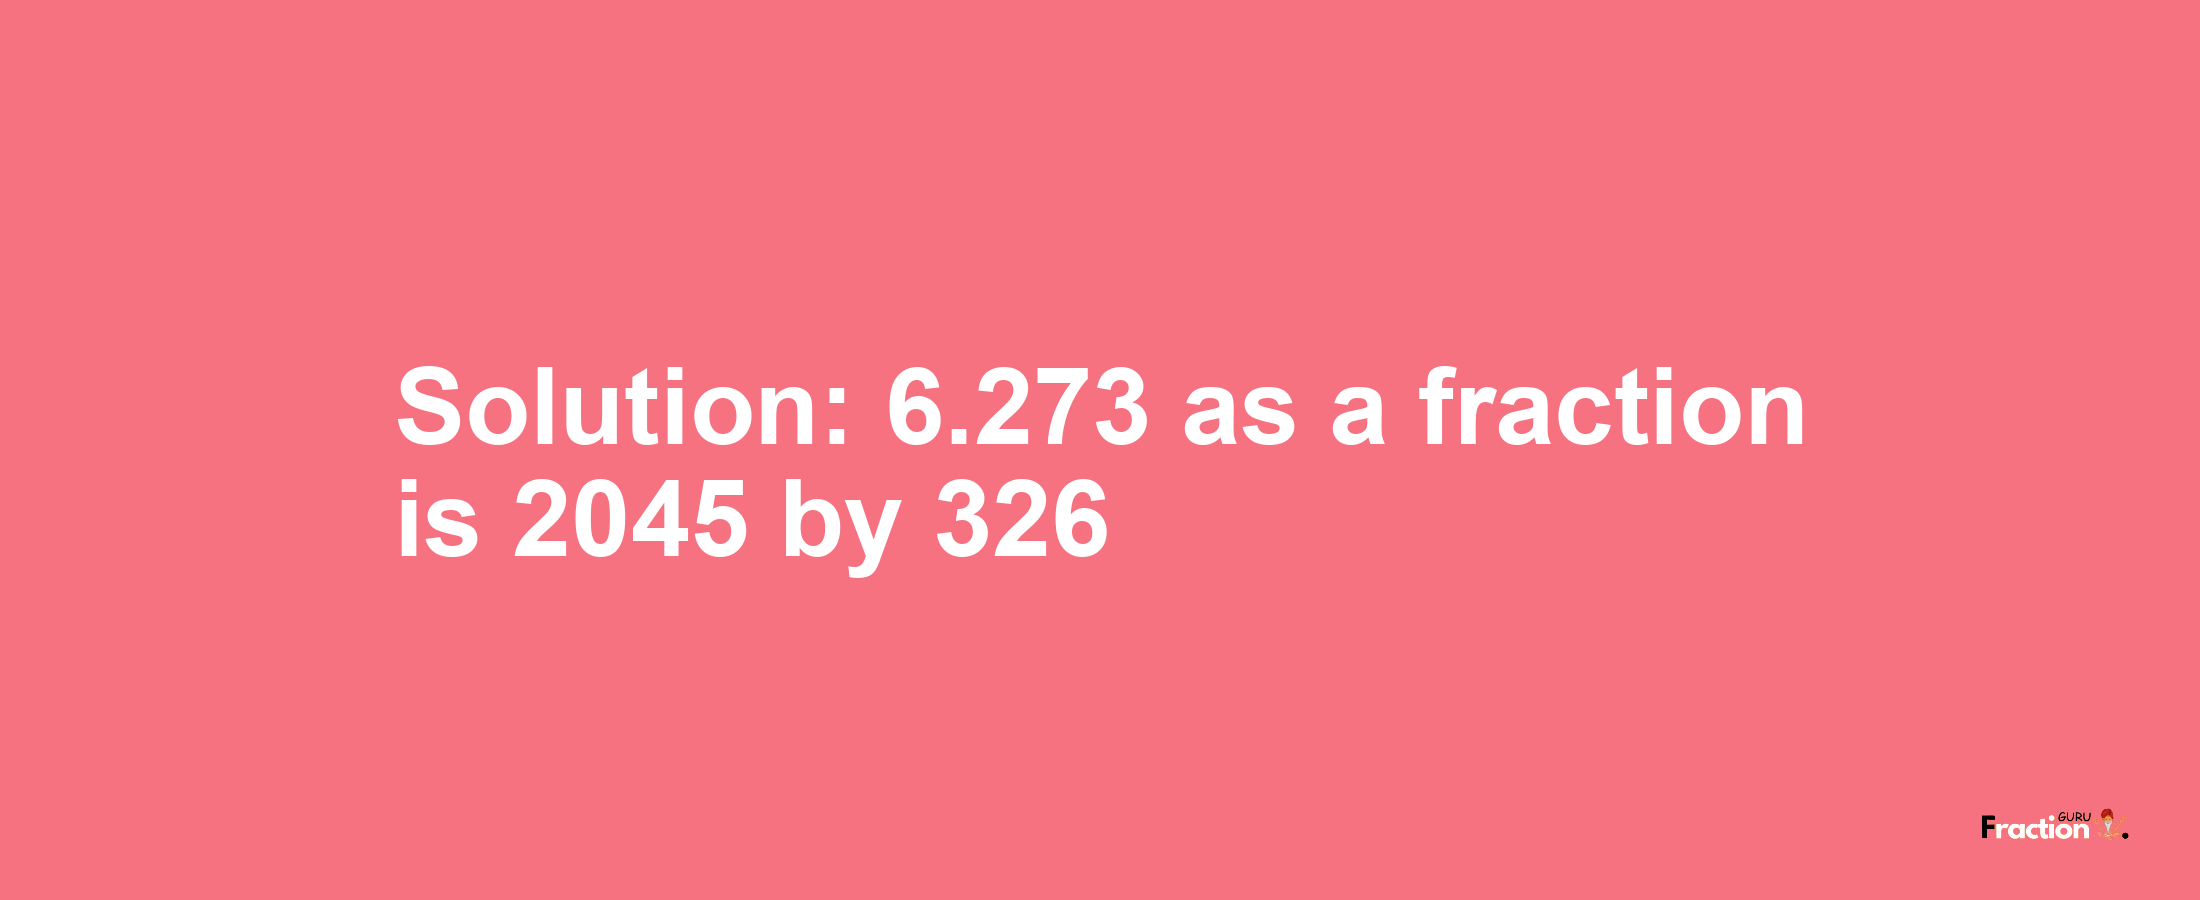 Solution:6.273 as a fraction is 2045/326